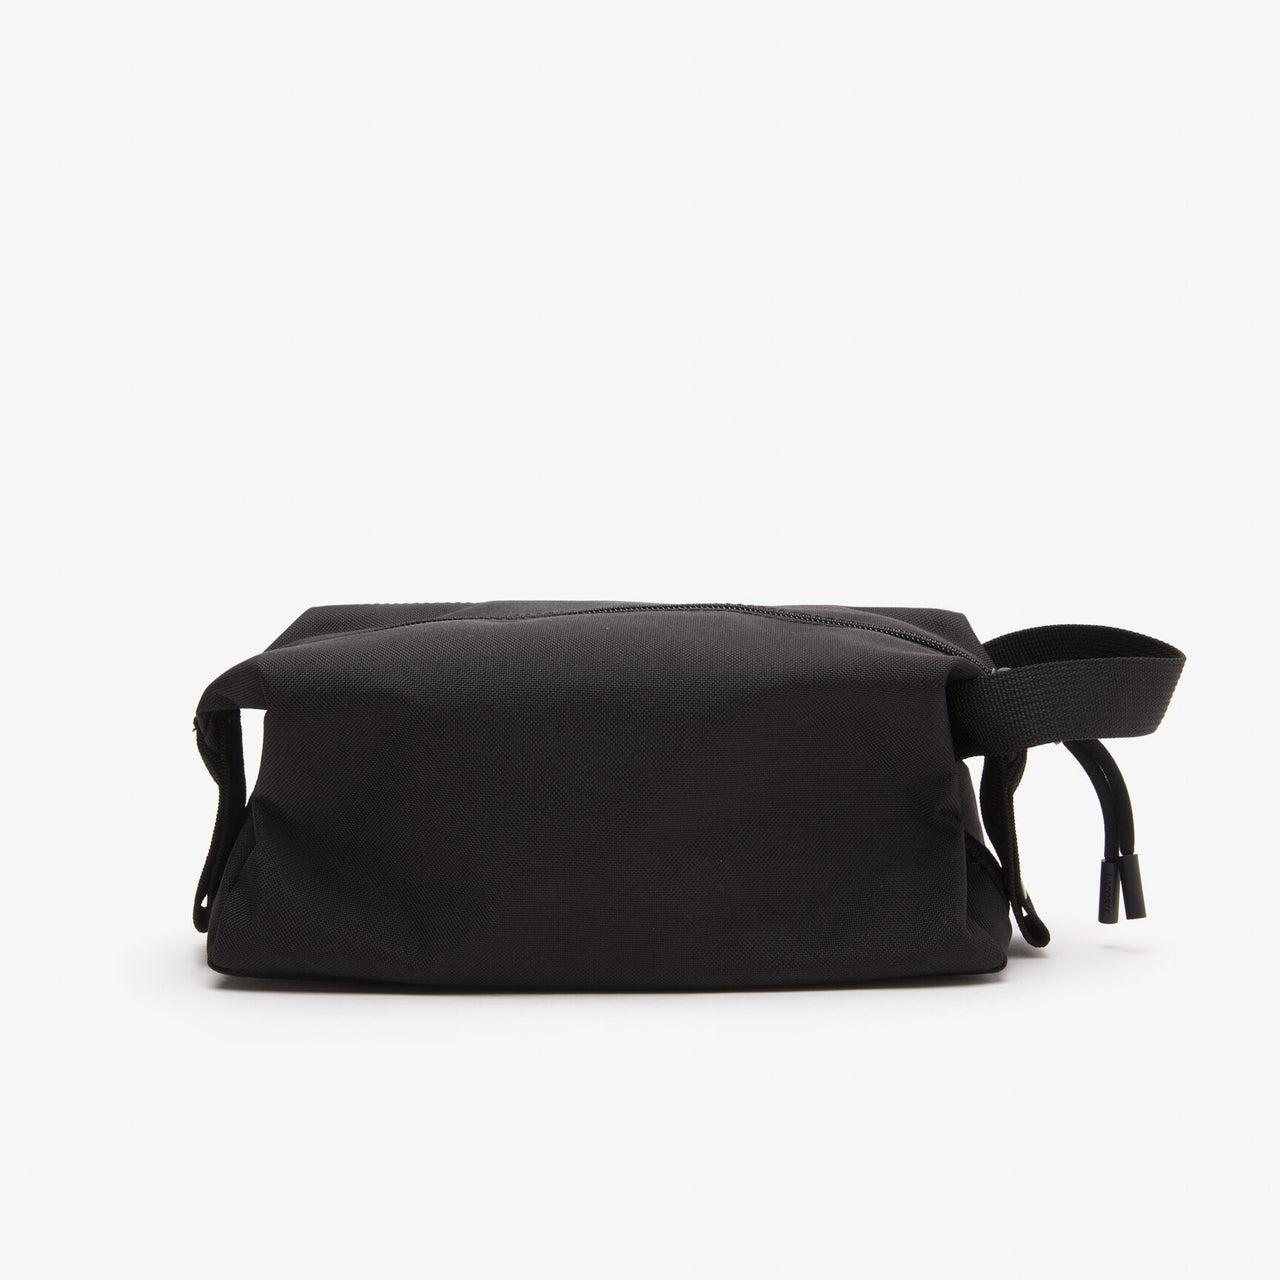 Lacoste - Unisex Zippered Toiletry Bag